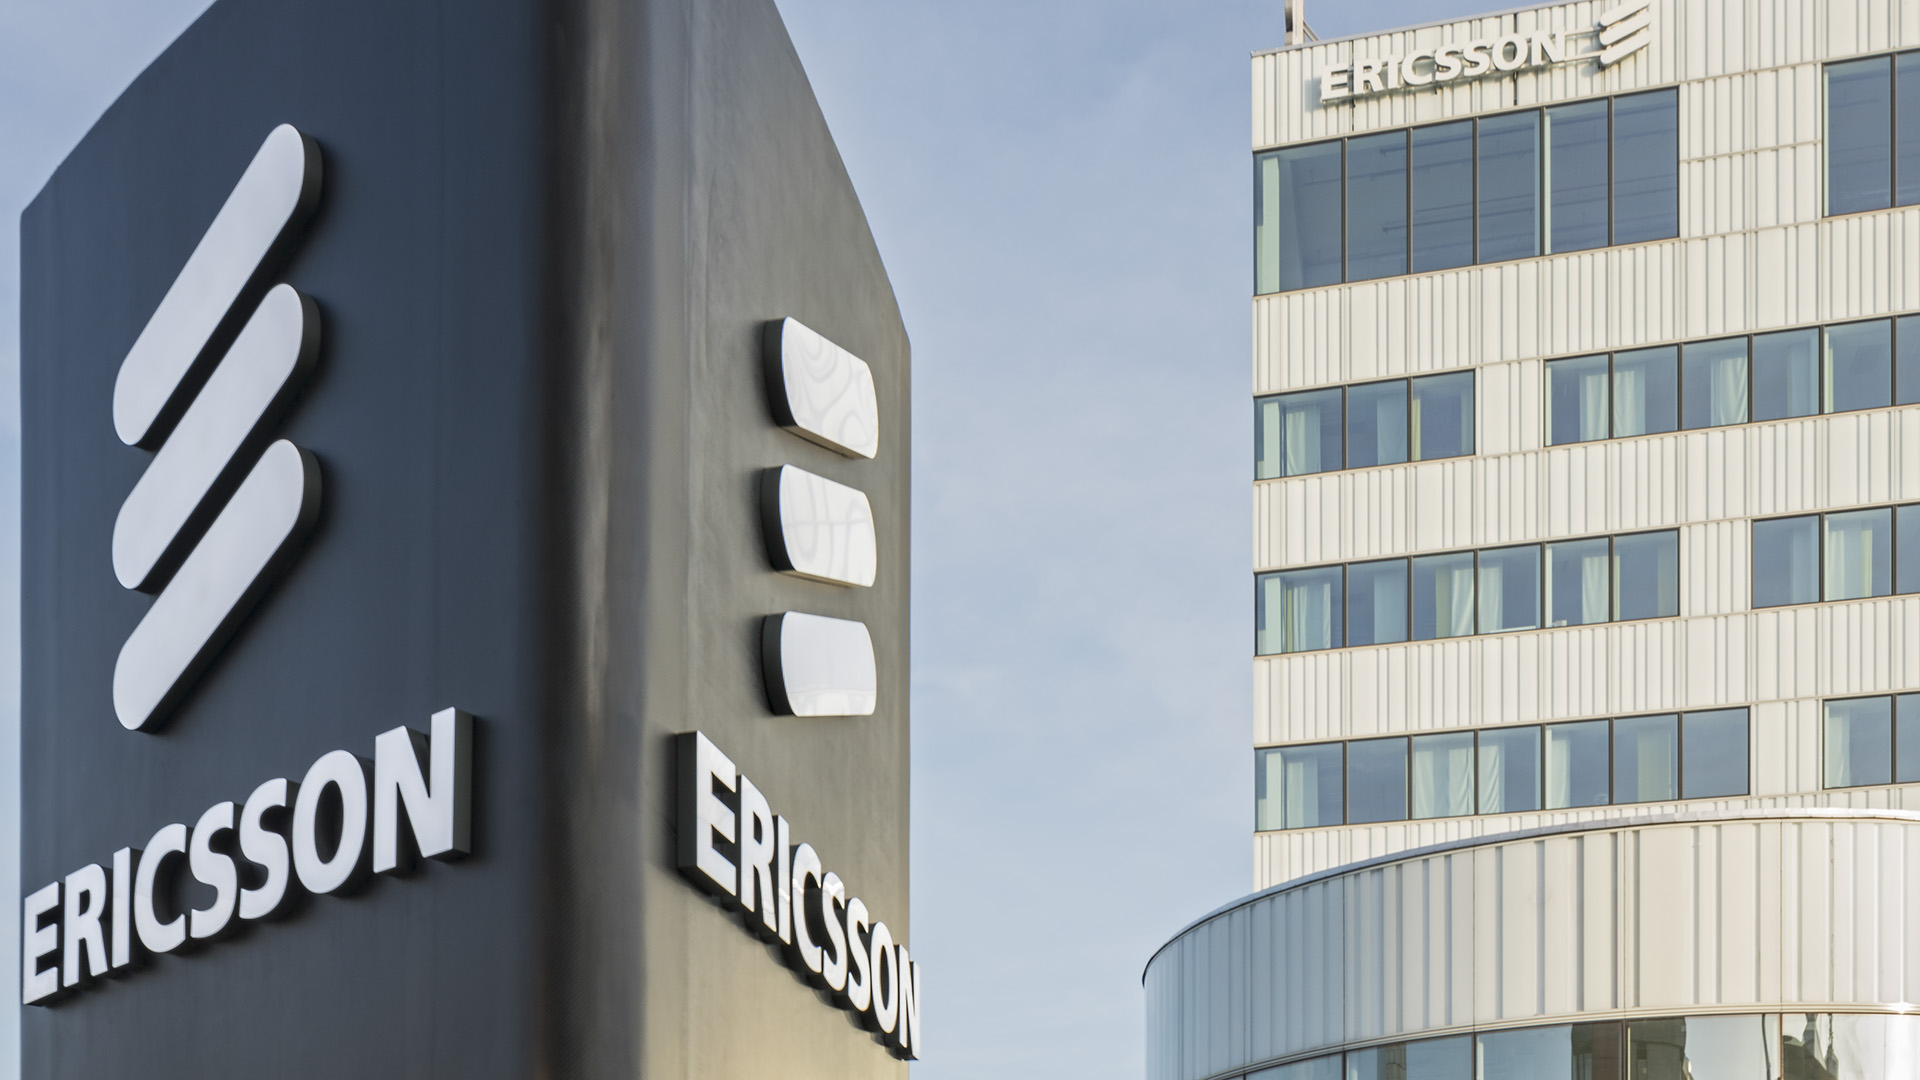 Ericsson 5G 100 commercial agreements